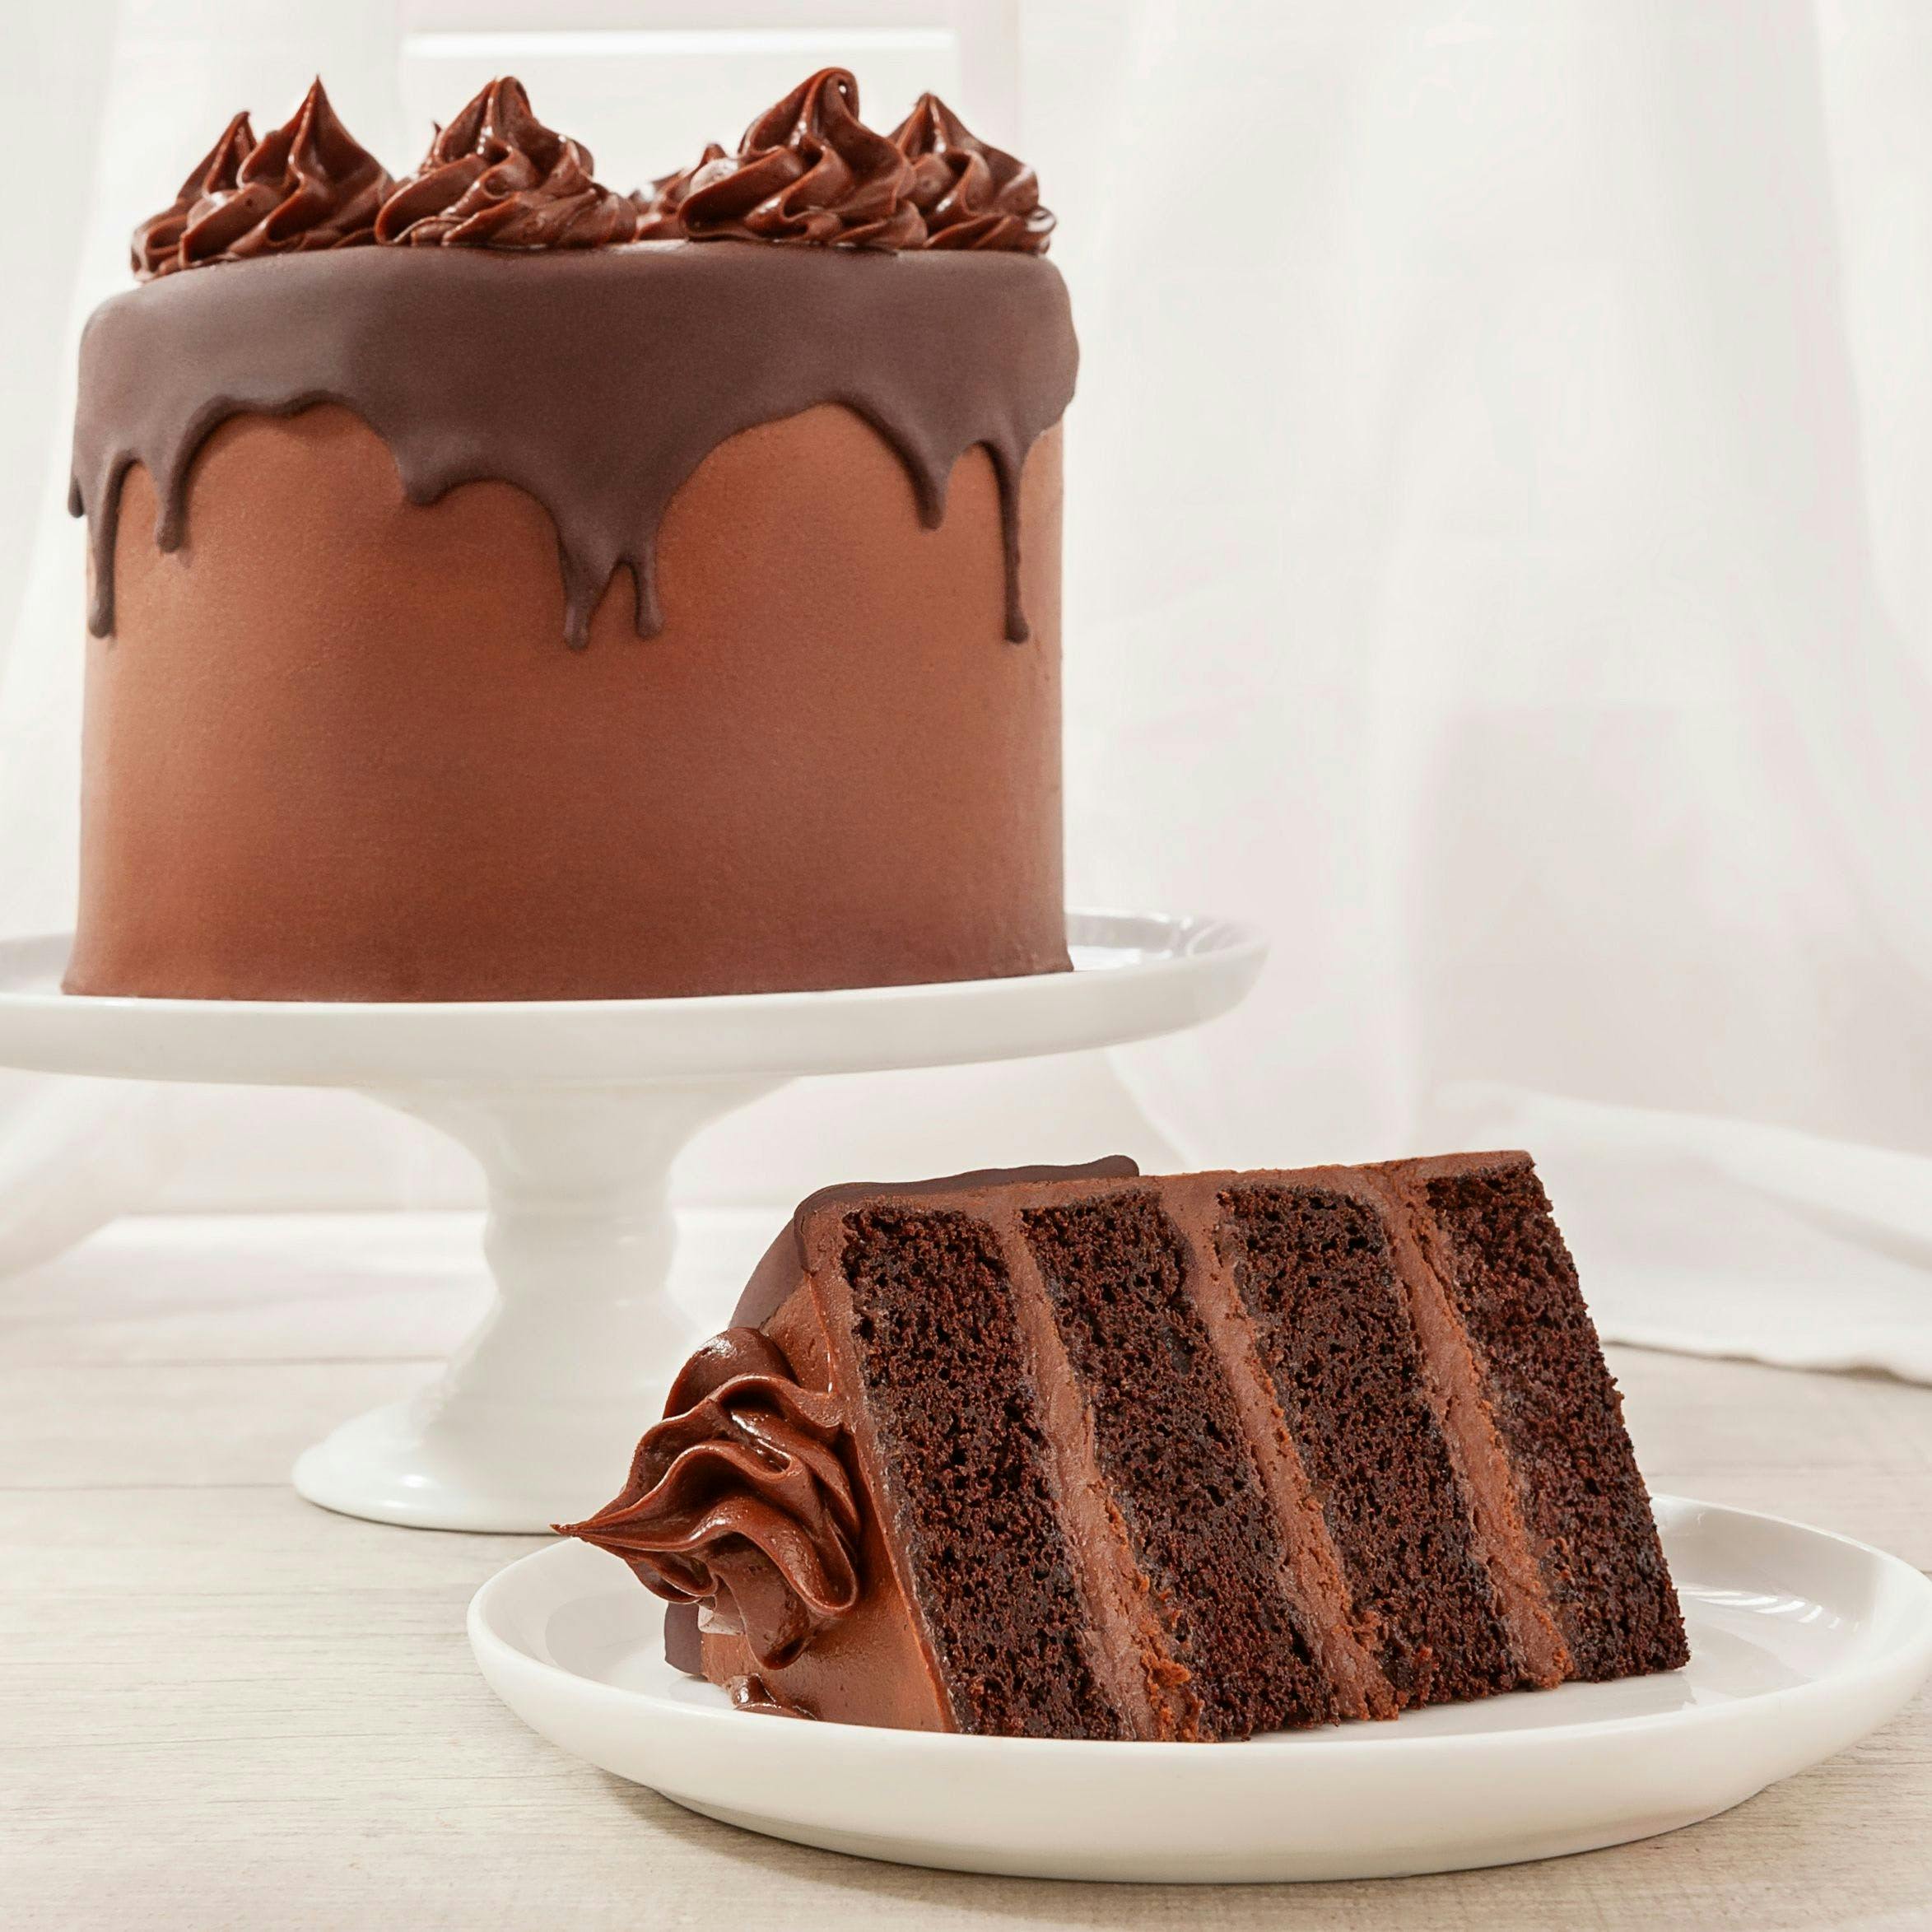 Cake Delivery in Singapore | Pastry & Desserts Awfully Chocolate Delivery